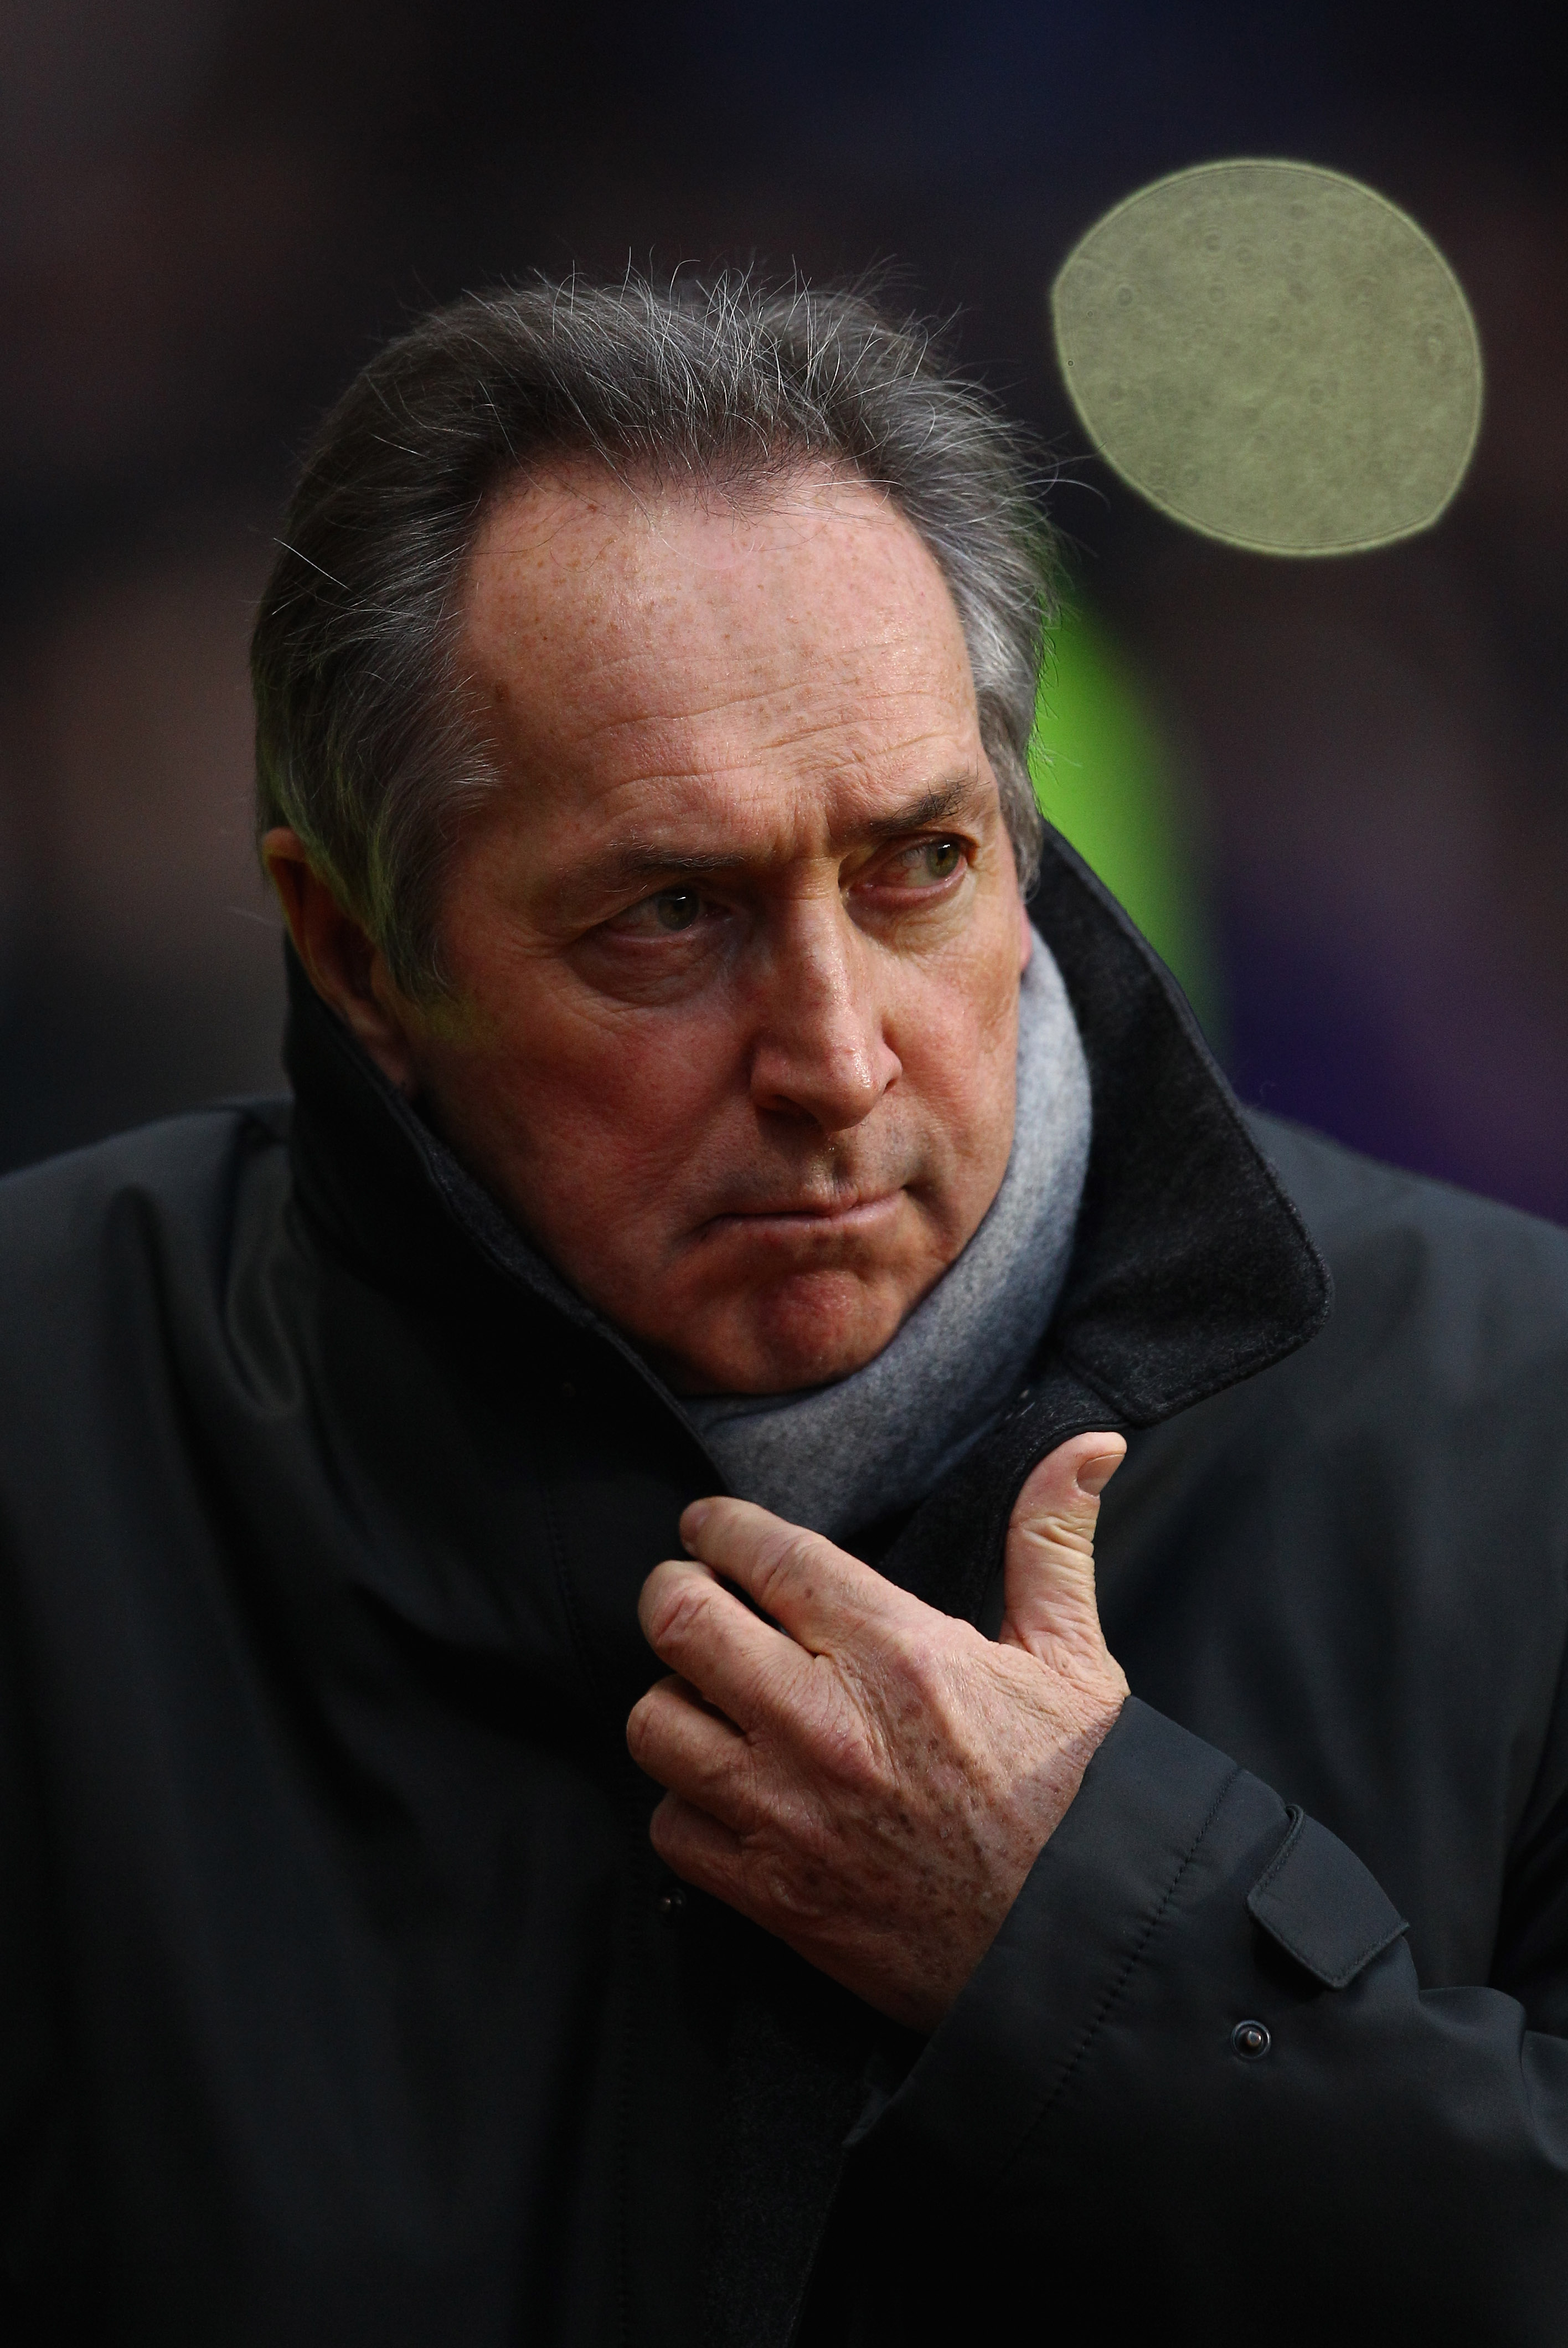 BIRMINGHAM, ENGLAND - DECEMBER 11:  Villa manager Gerard Houllier looks on during the Barclays Premier League match between Aston Villa and West Bromwich Albion at Villa Park on December 11, 2010 in Birmingham, England.  (Photo by Richard Heathcote/Getty